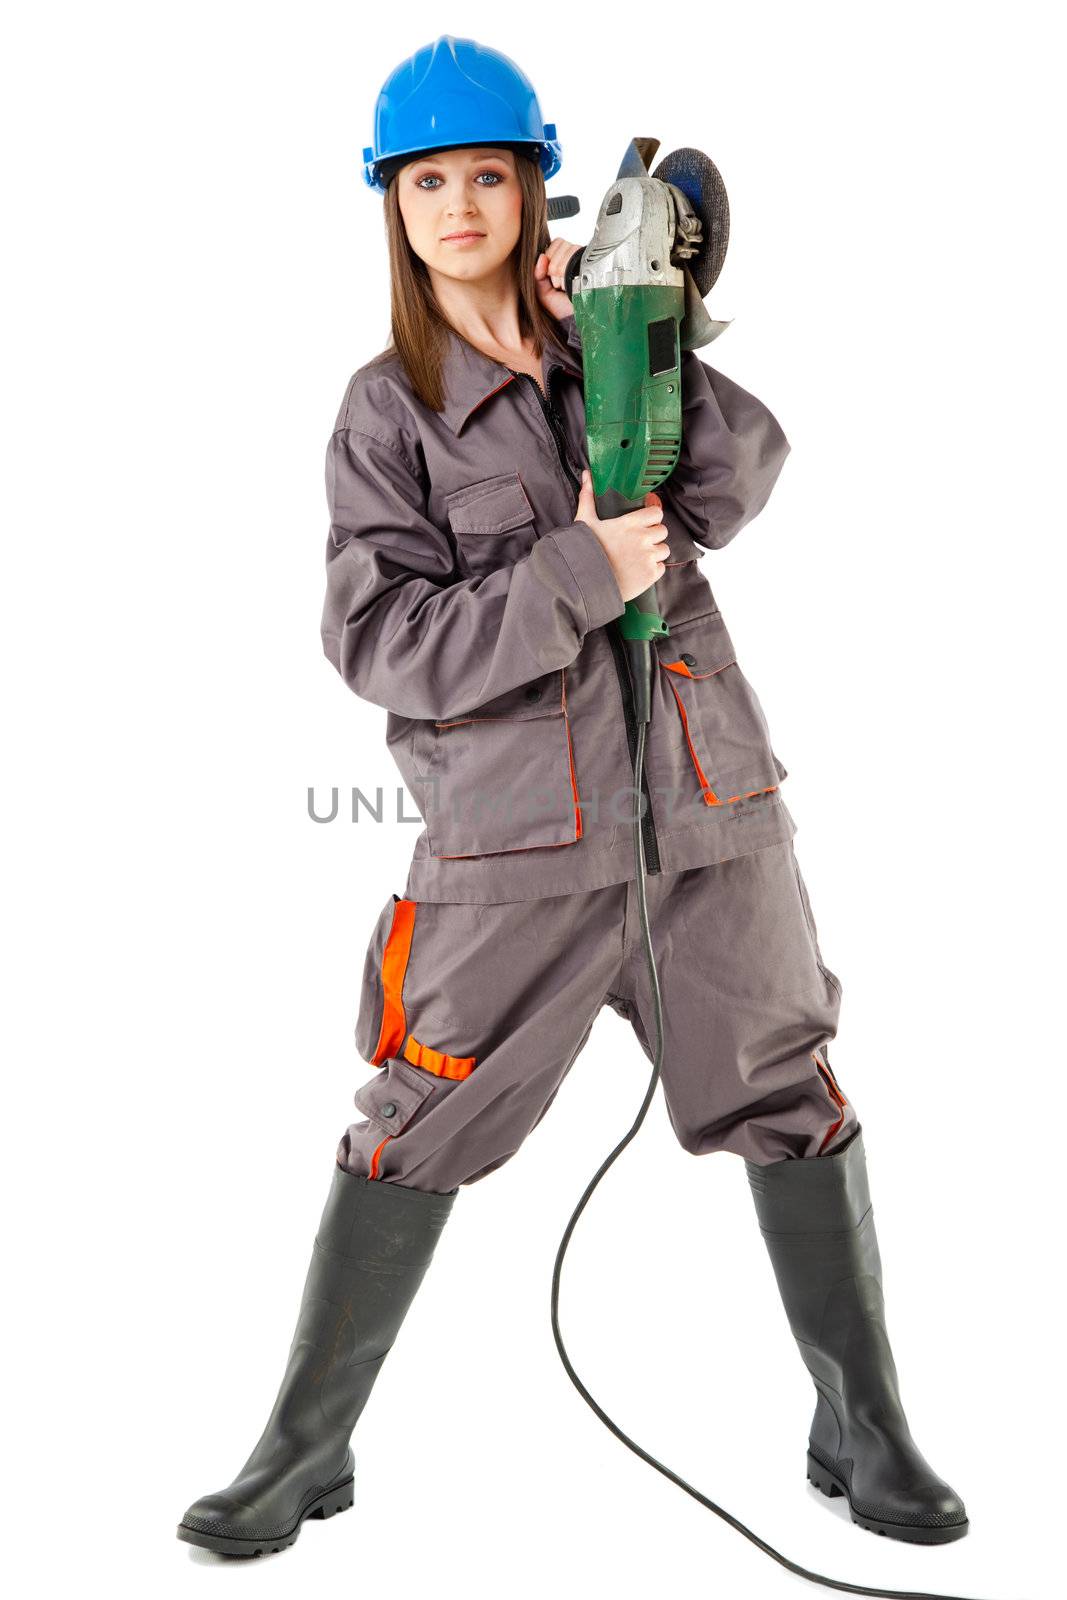 Beautiful young female with workwear and boots standing and holding grinder